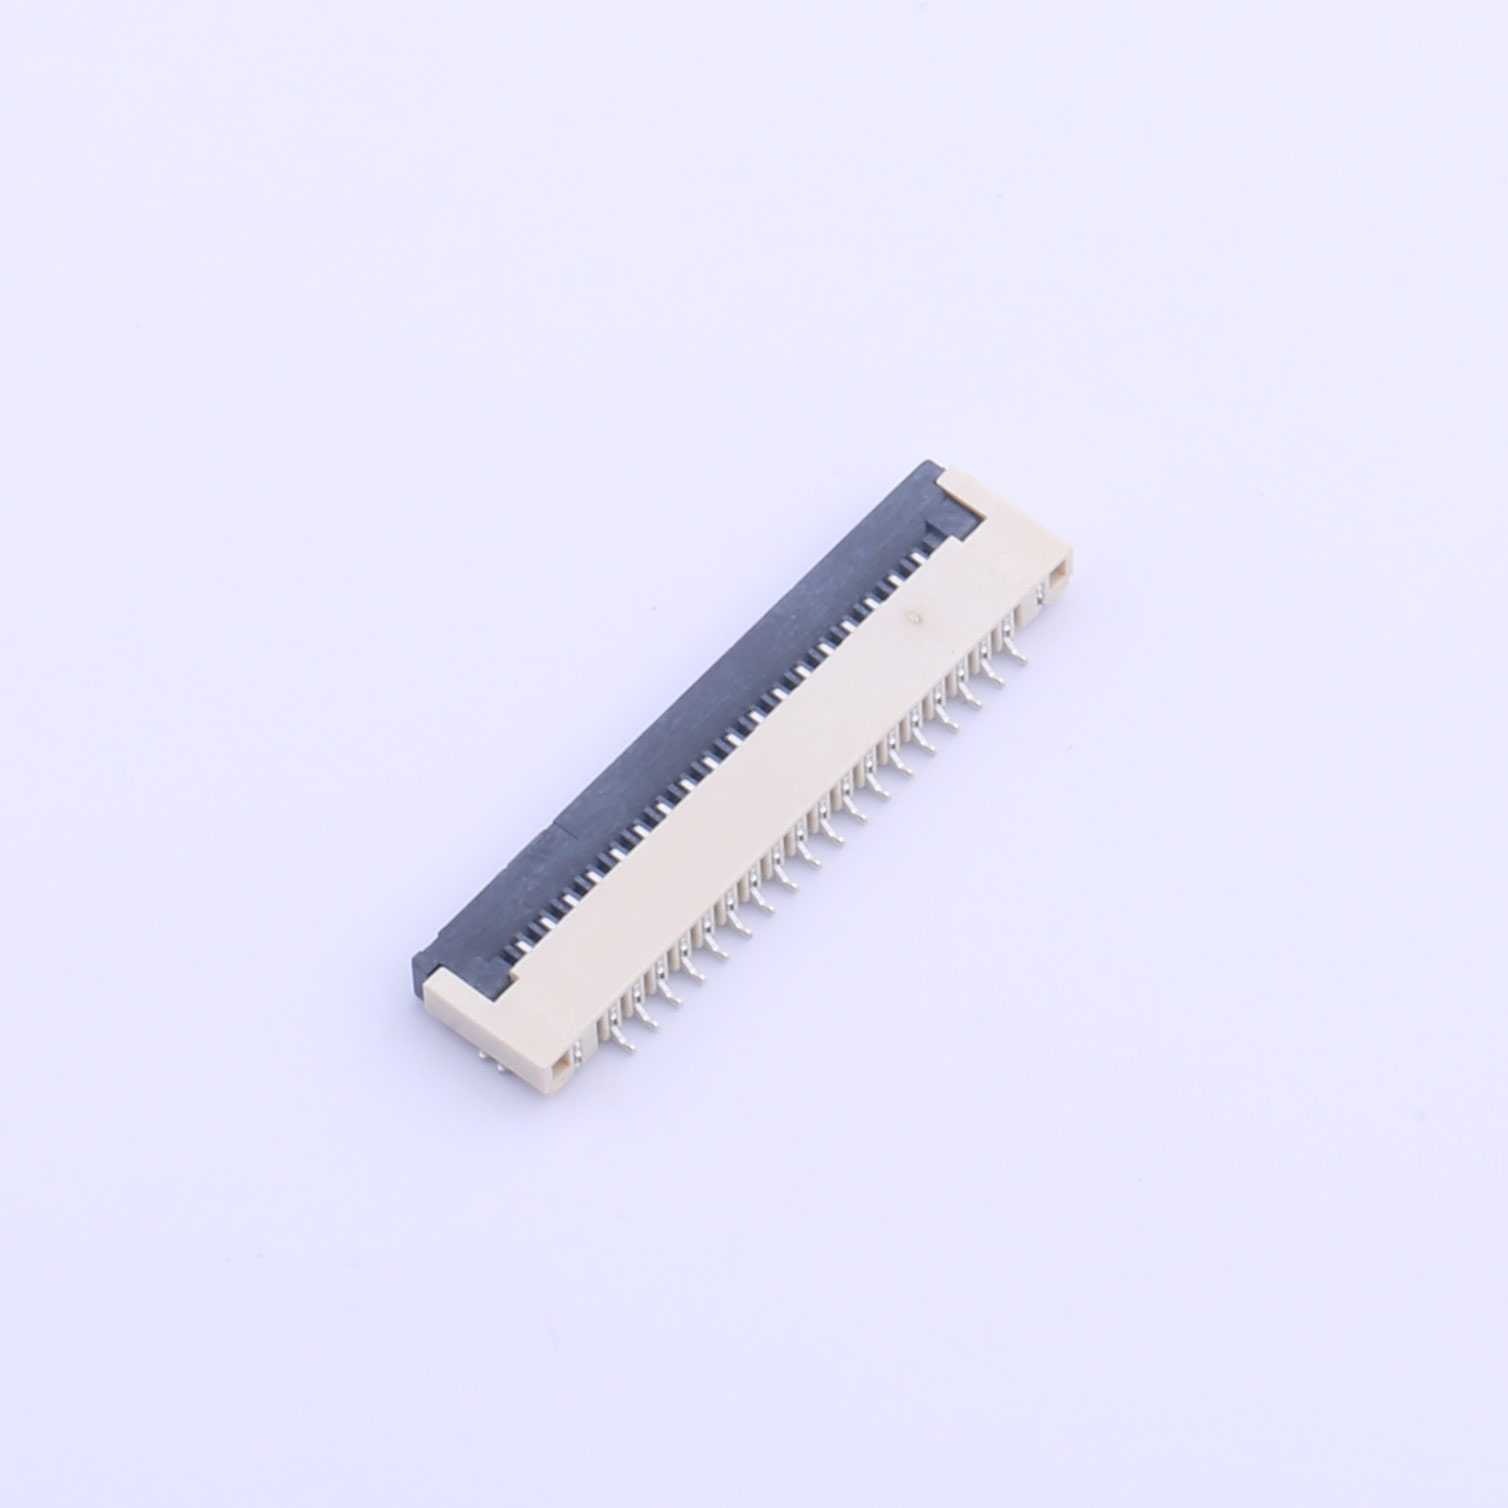 Kinghelm Pitch 1mm FFC/FPC Connector 16p Pitch - KH-FG1.0-H2.0-16pin